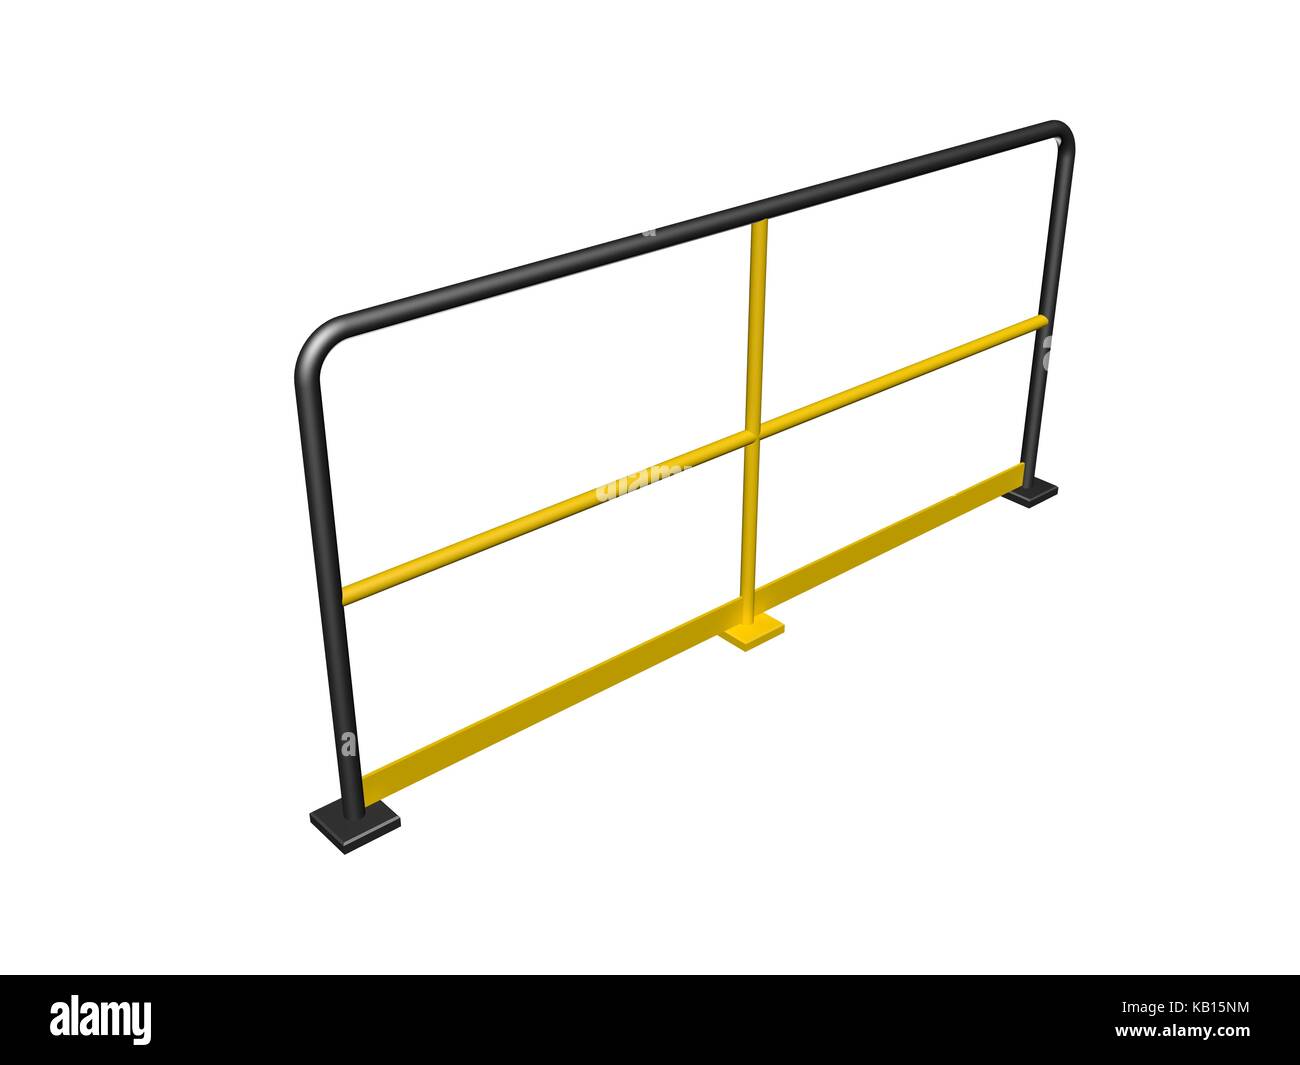 Side view of yellow and black steel industrial handrail railing section isolated on white background. 3d render illustration Stock Photo